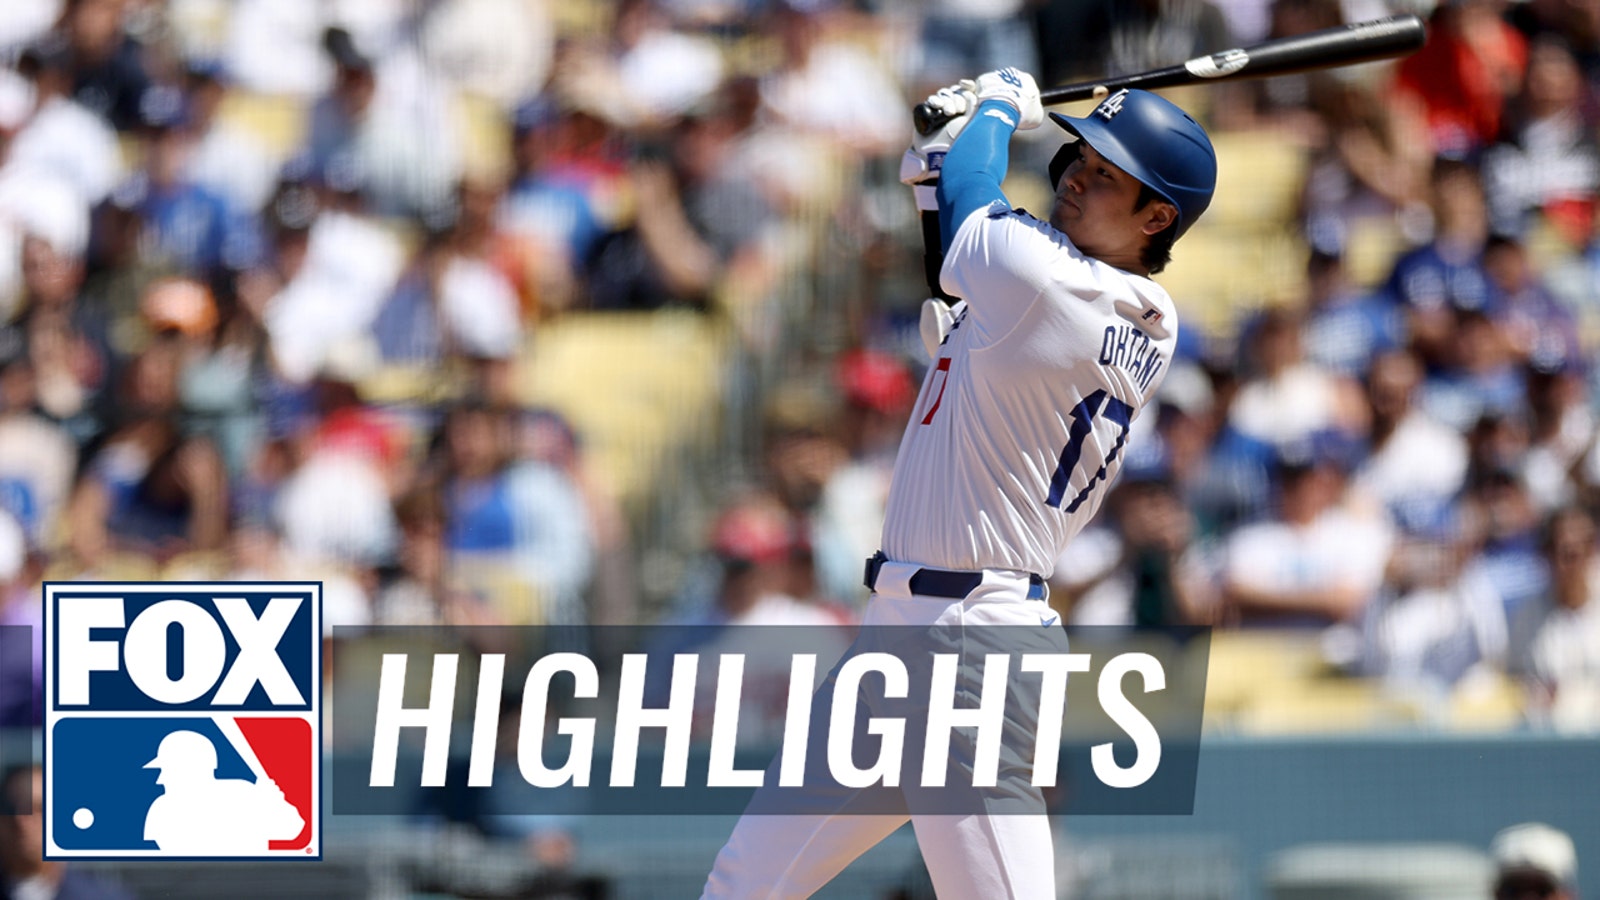 Highlights from Dodgers' 5-1 win vs. Braves